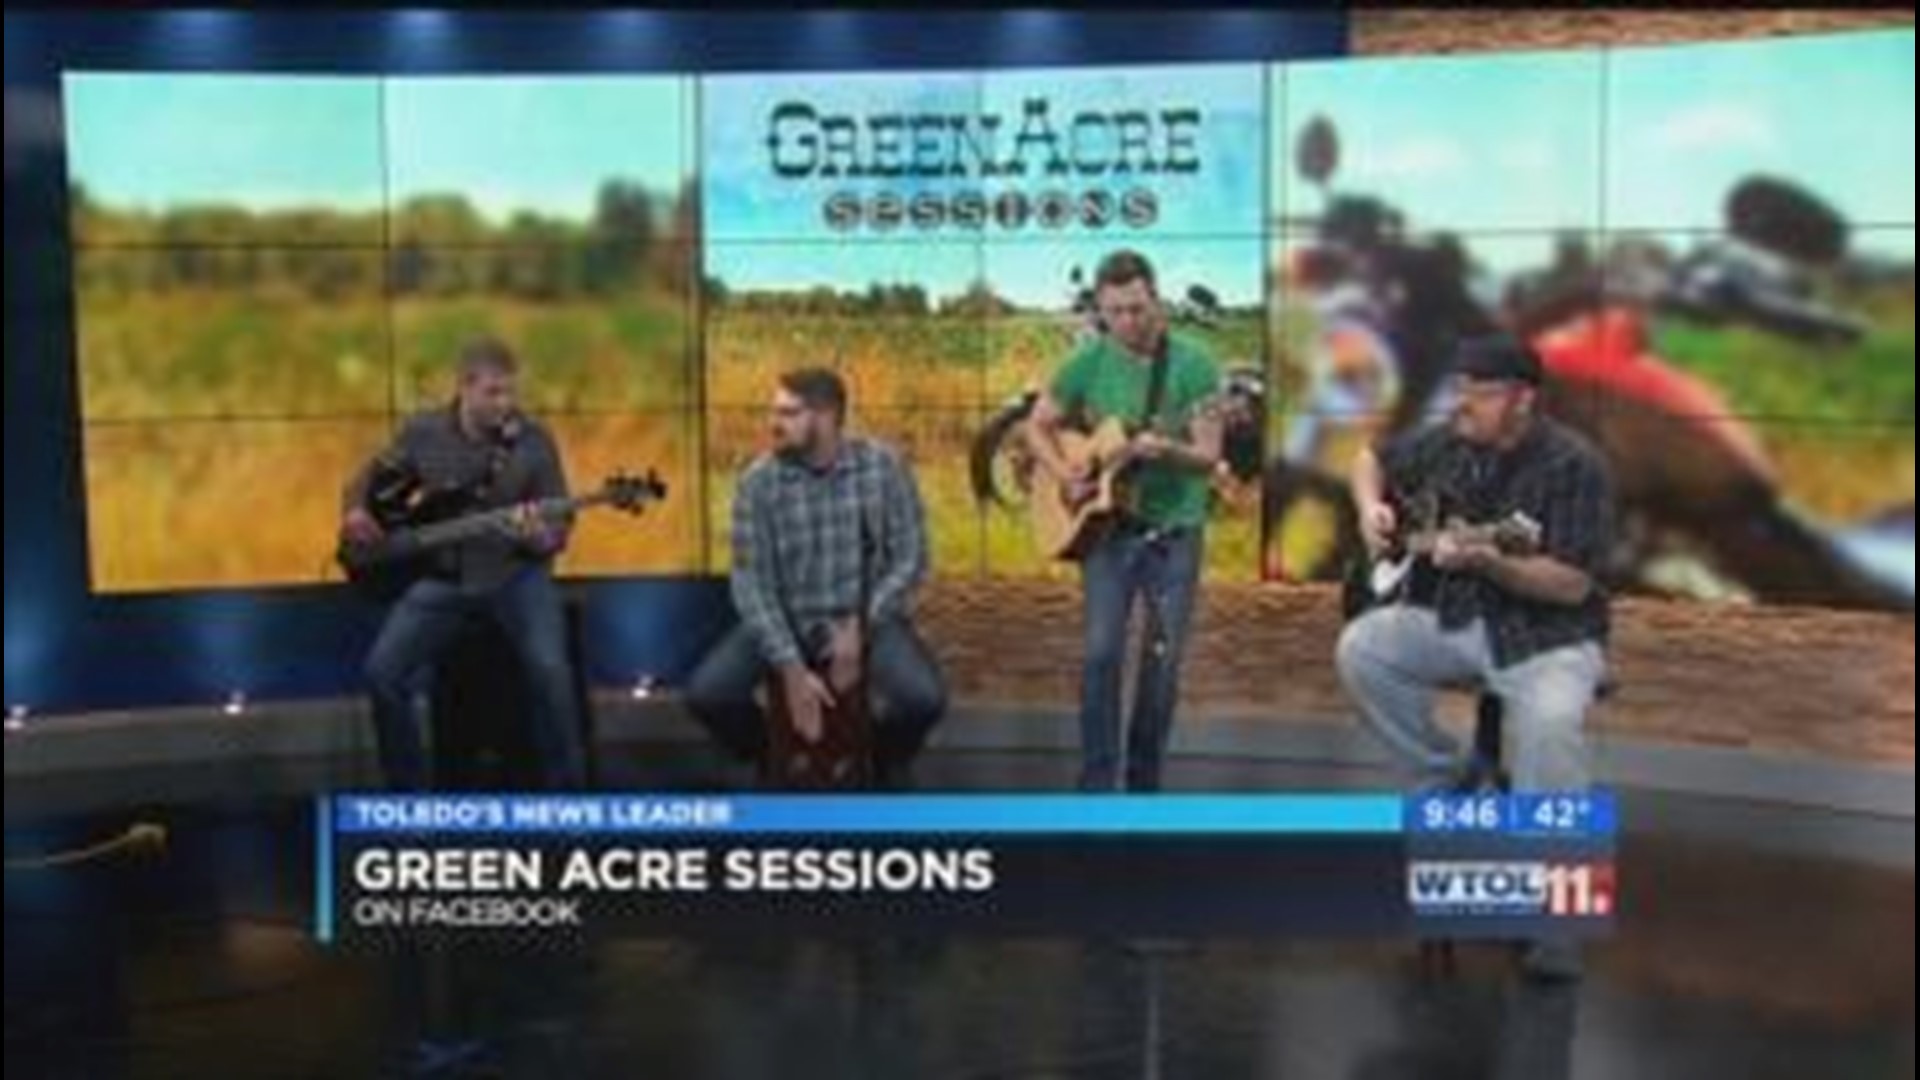 Local band Green Acre Sessions plays variety of music genres part 2